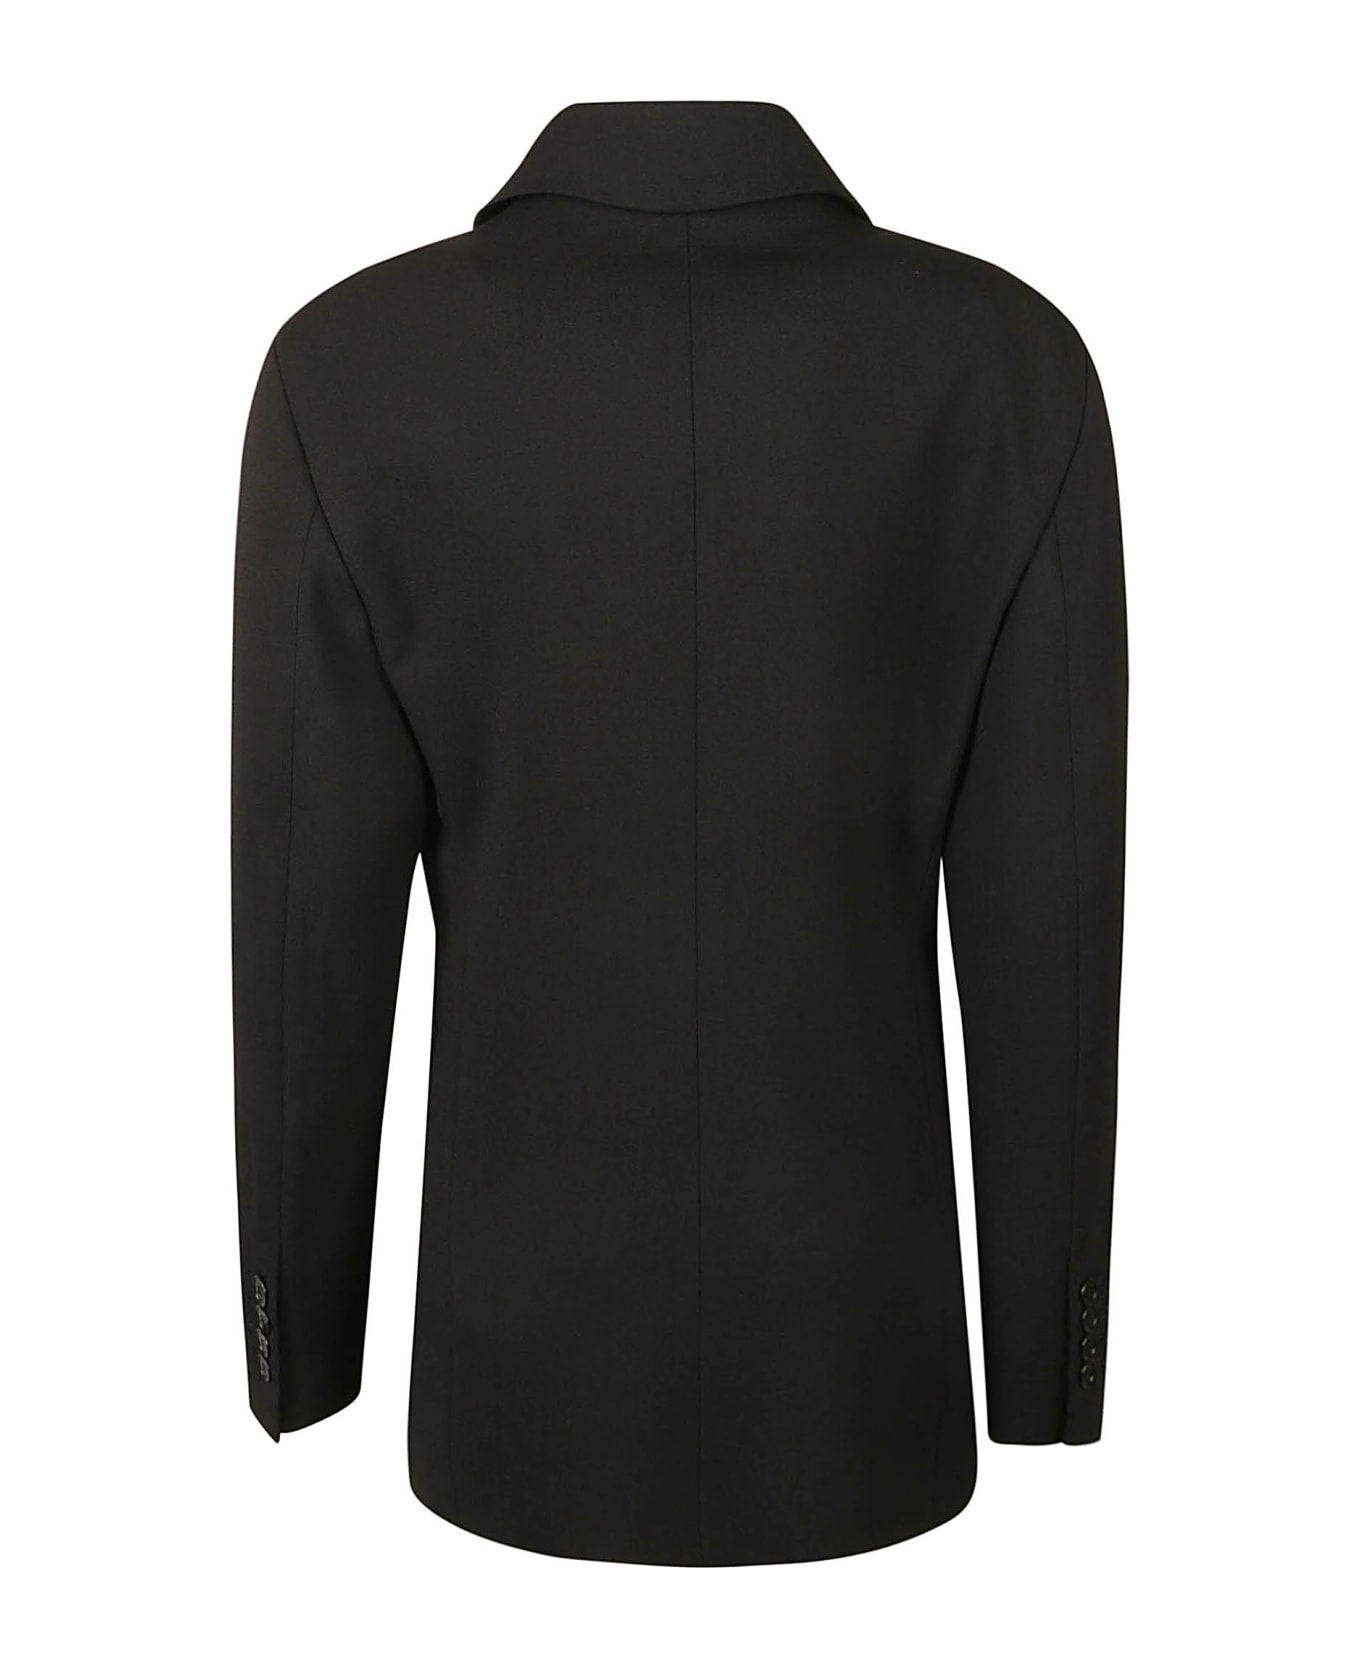 Lanvin Single-breasted Fitted Blazer - Black